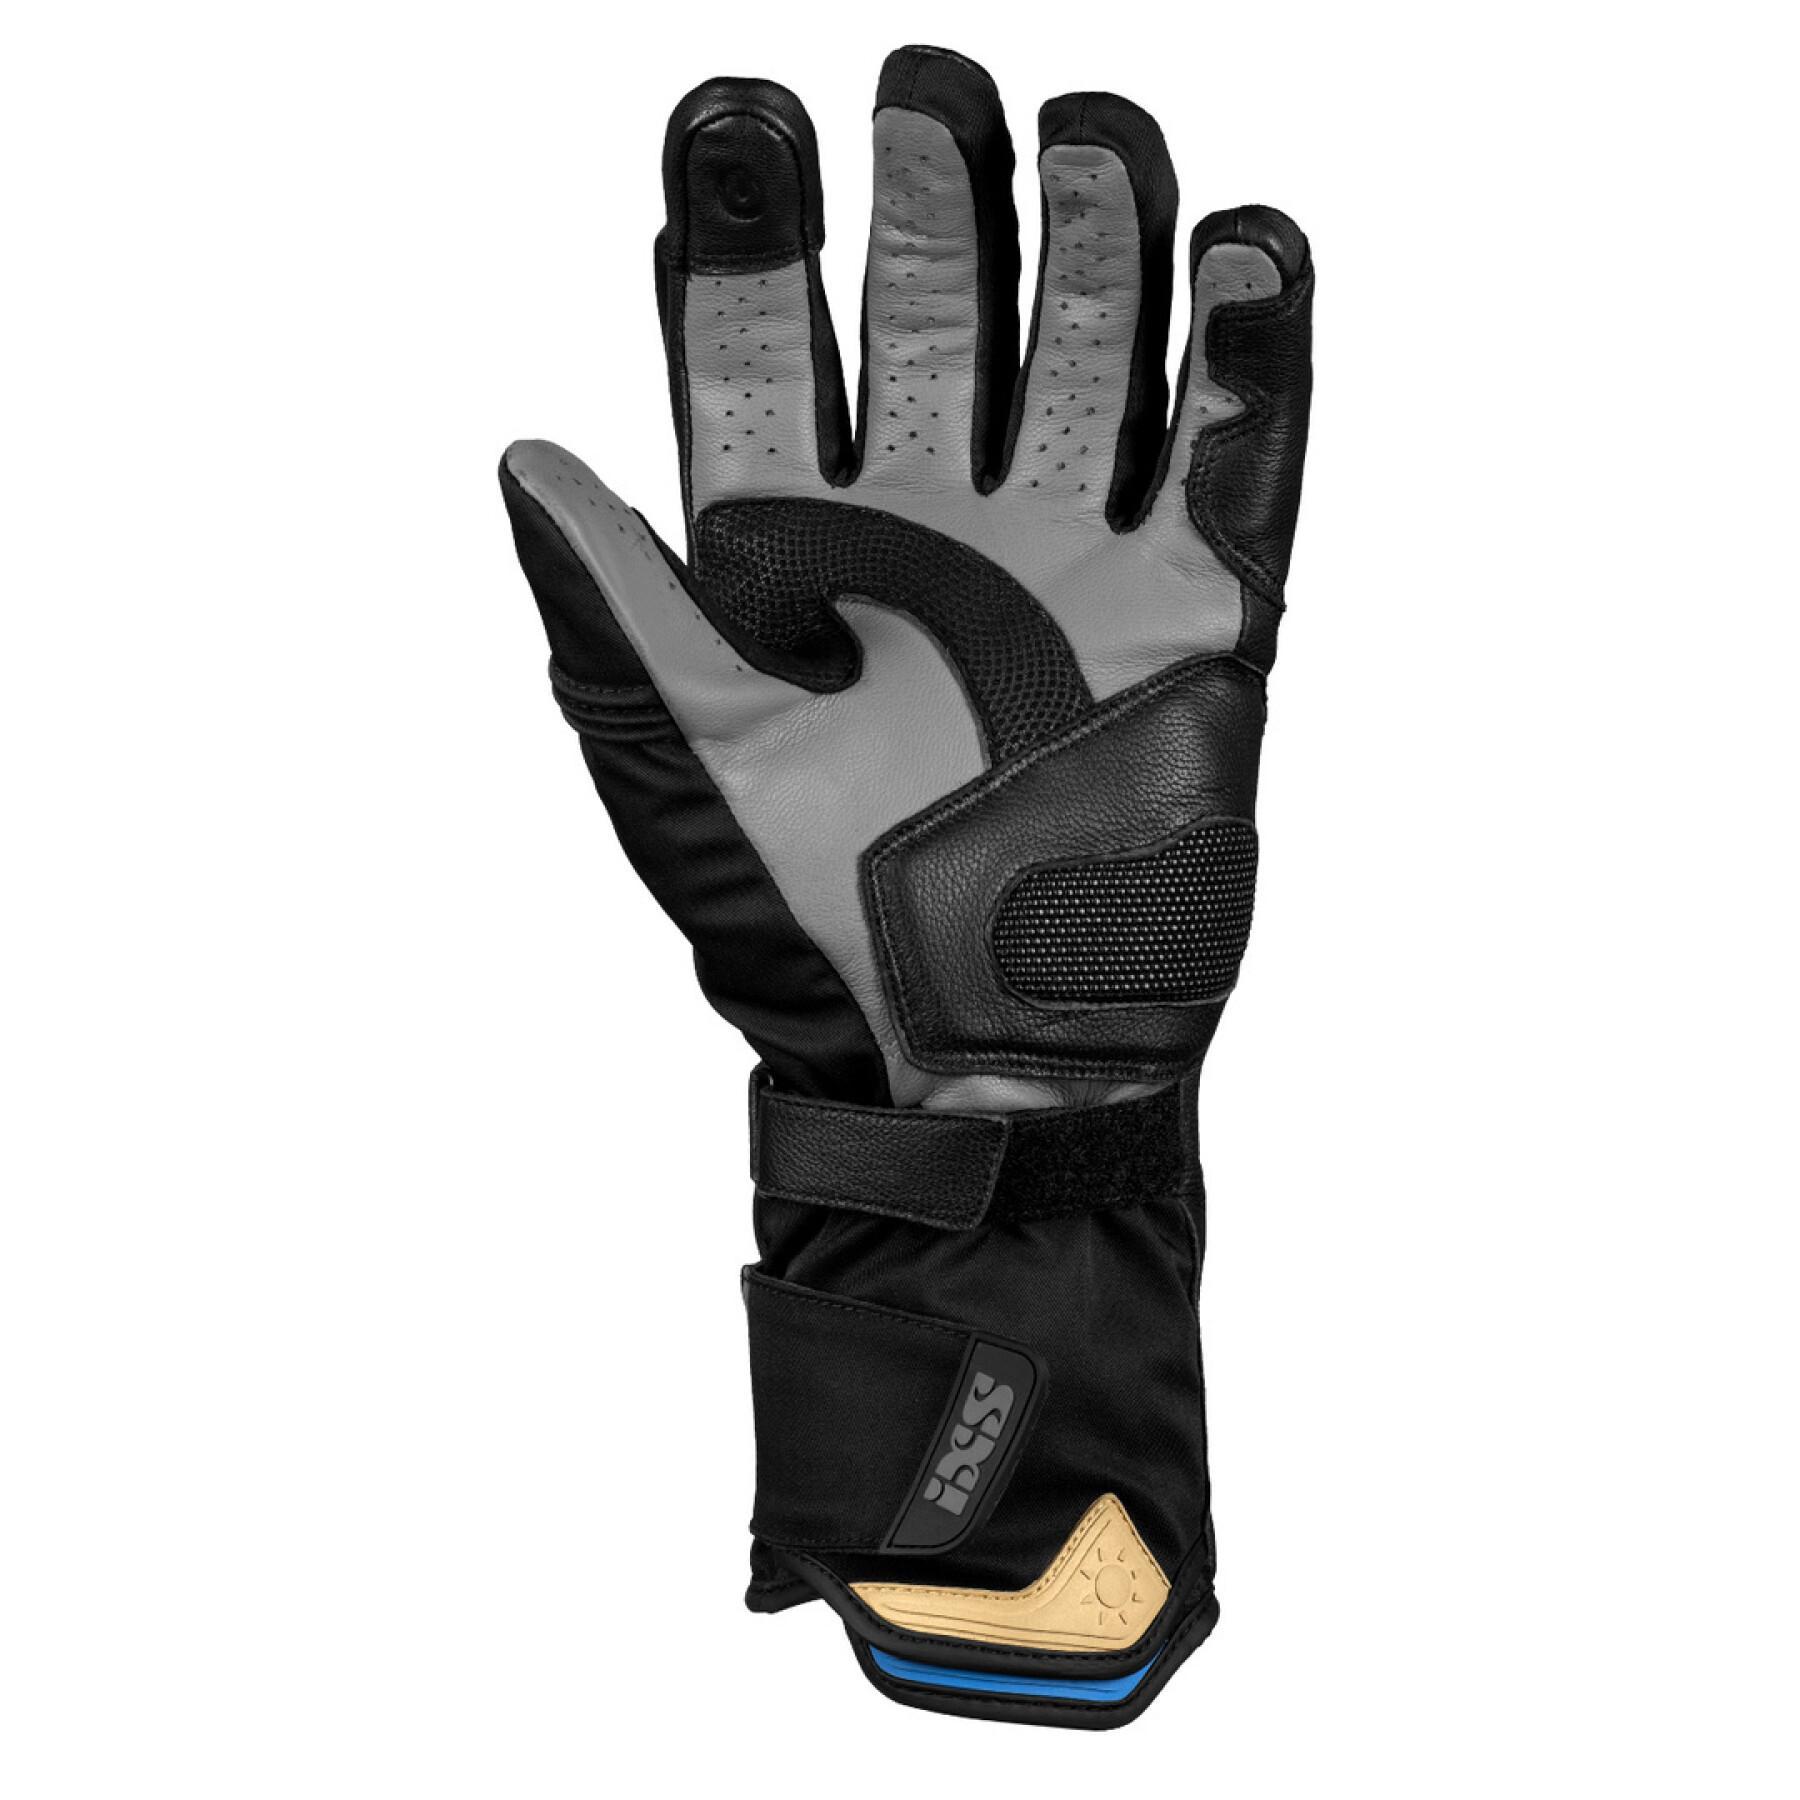 Double glove tower IXS ST+ 1.0